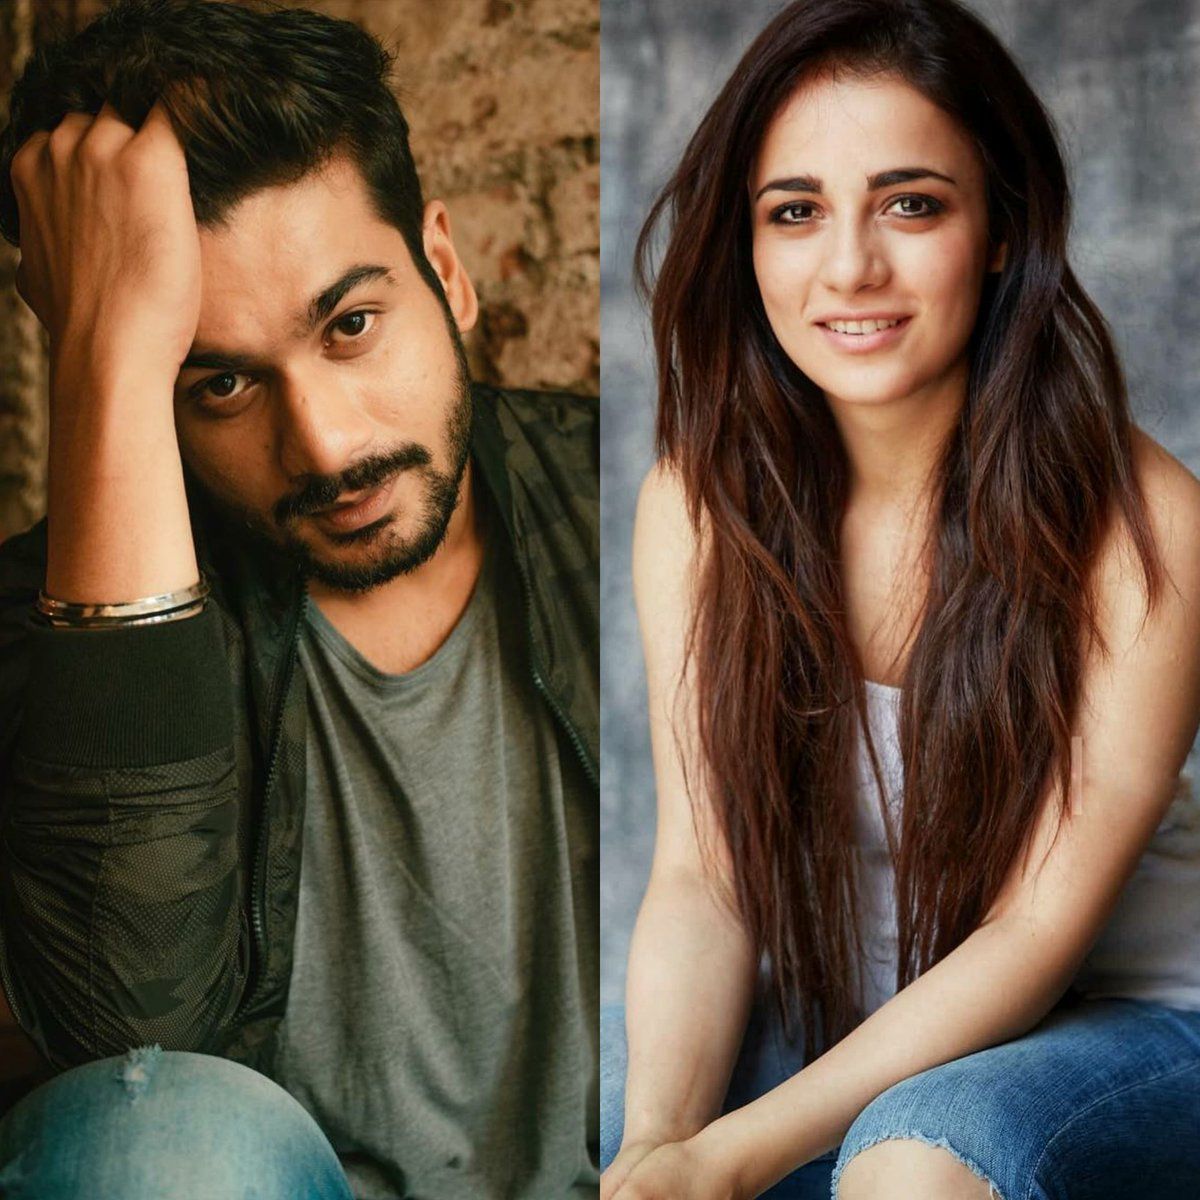 Sunny Kaushal And Radhika Madan To Come Together For Shiddat, Also Stars Mohit Raina And Diana Penty